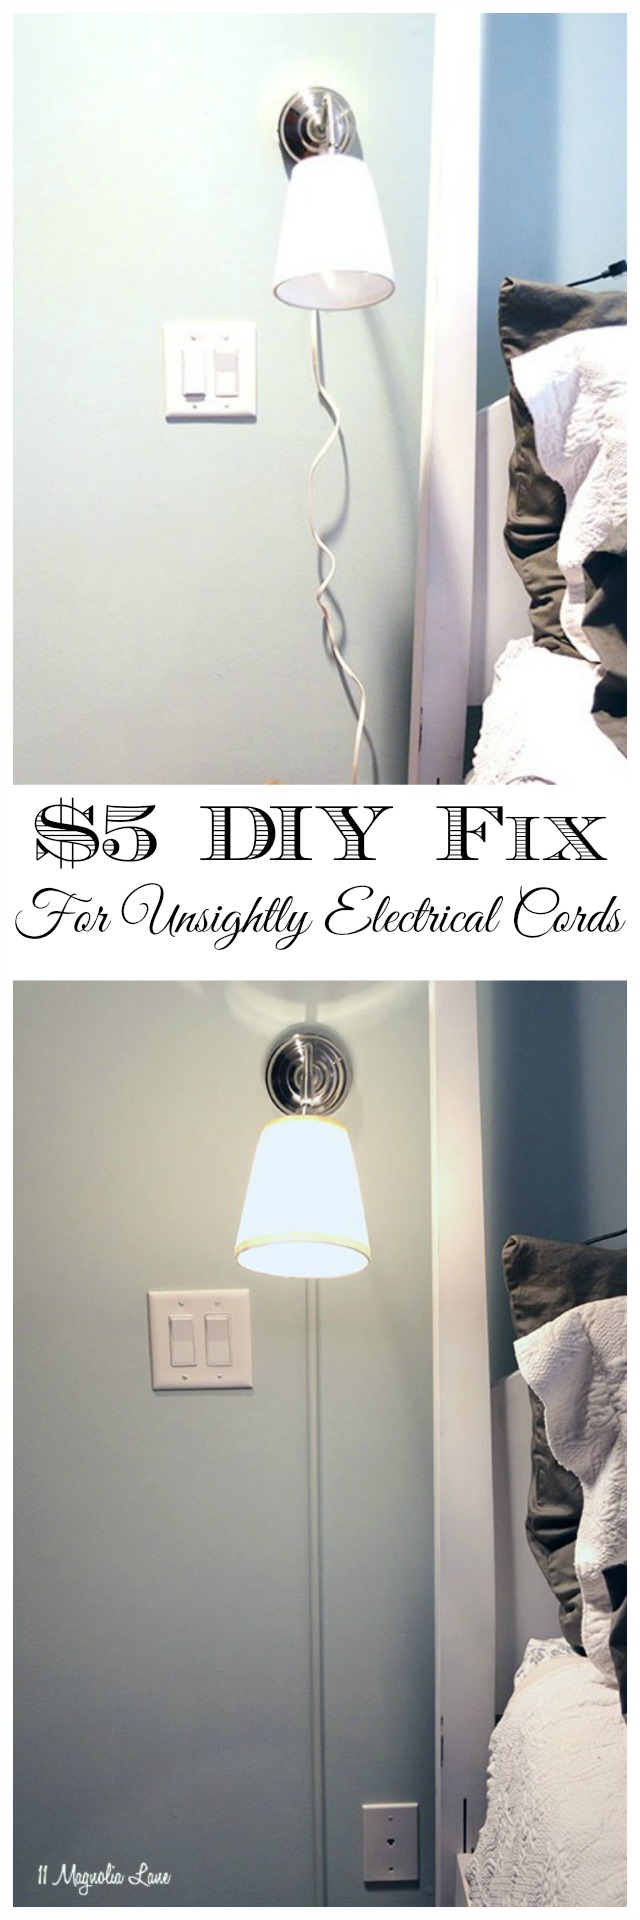 How to hide unsightly electrical cords | 11 Magnolia Lane